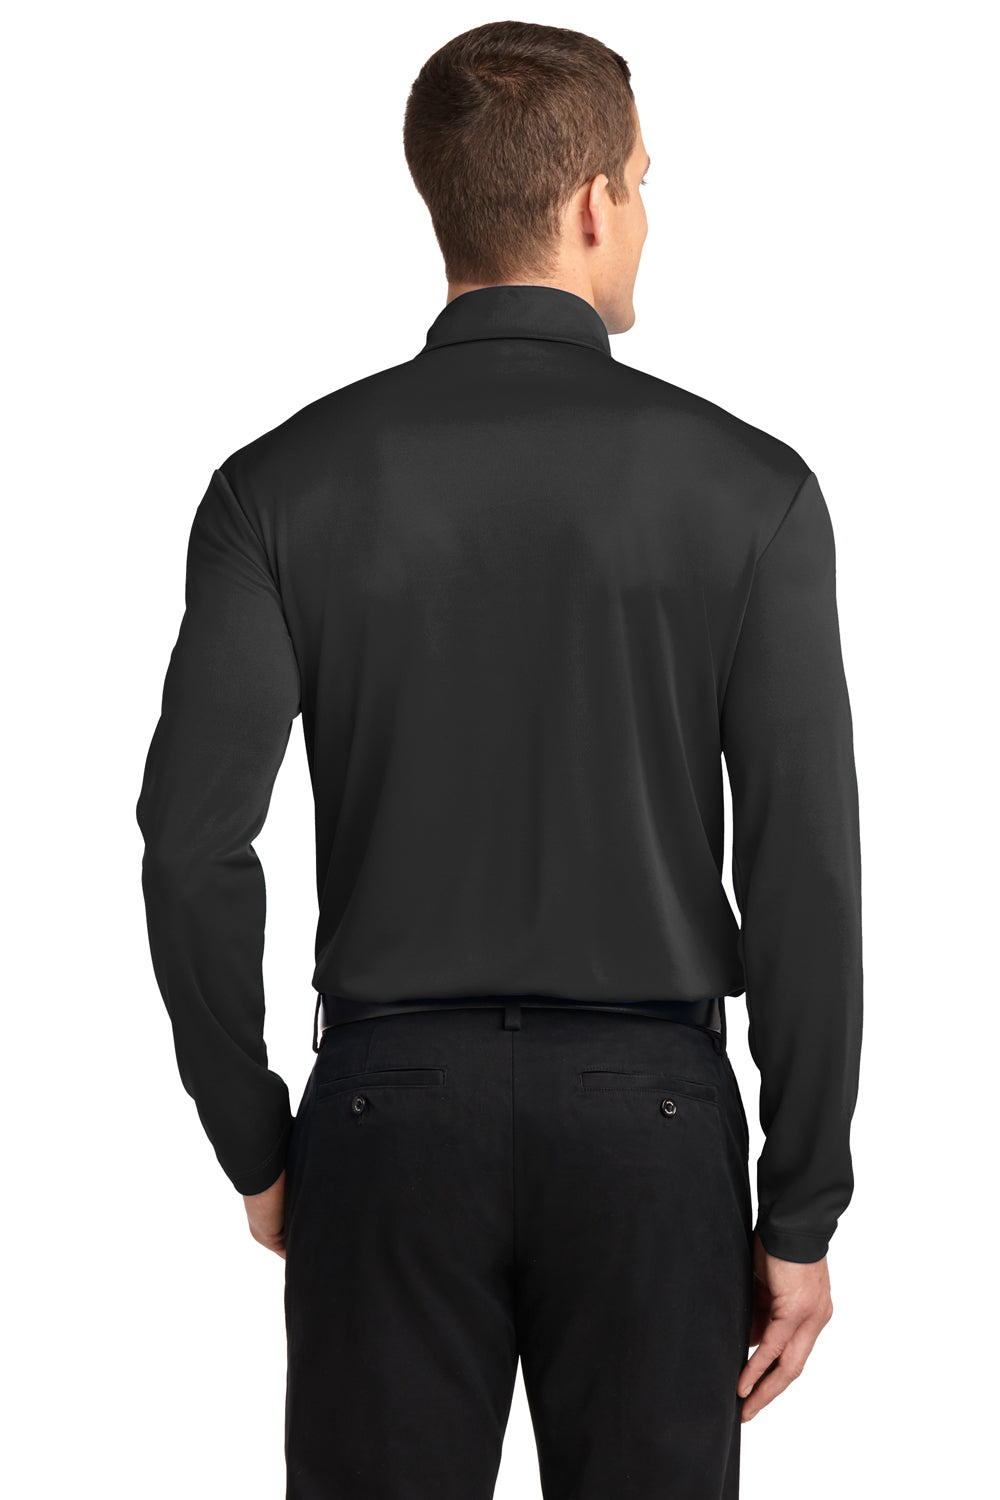 Port Authority K540LS Mens Silk Touch Performance Moisture Wicking Long Sleeve Polo Shirt Black Back